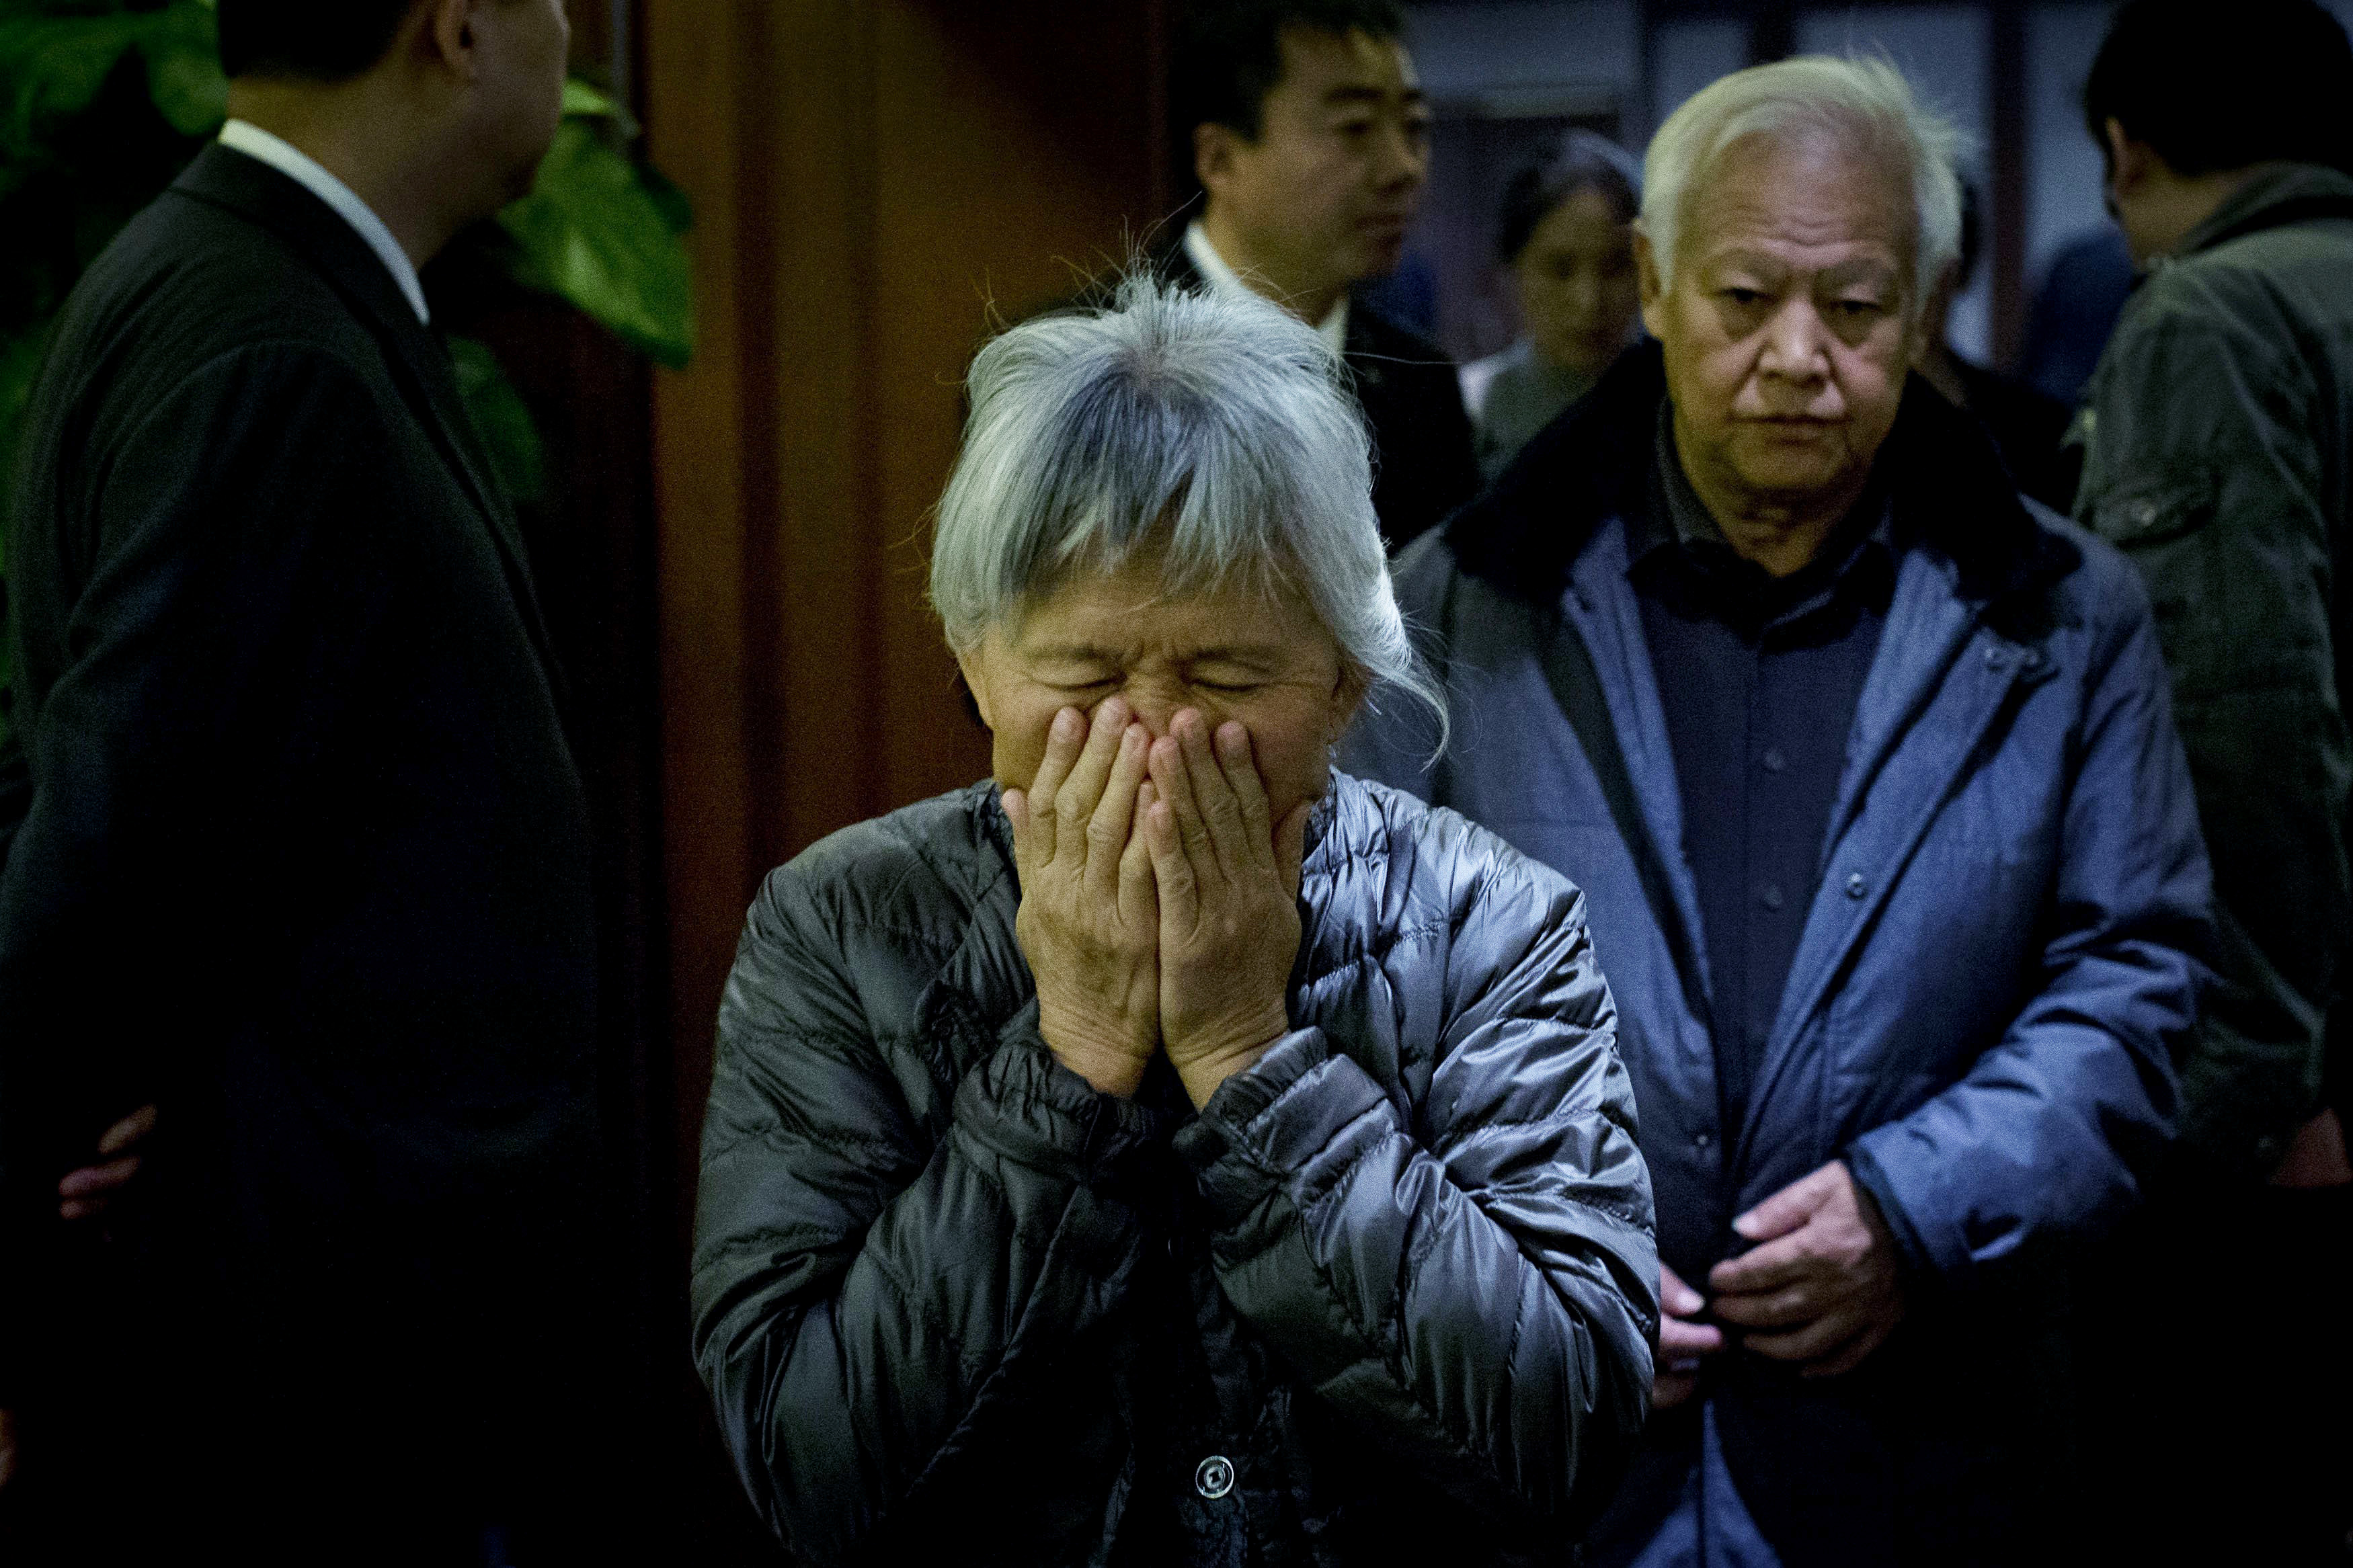 An elderly woman, one of the relatives of Chinese passengers aboard missing Malaysia Airlines Flight MH370, covers her face out of frustration as she leaves a hotel ballroom after a daily briefing meeting with managers of Malaysia Airlines in Beijing, on March 19, 2014. (Alexander F. Yuan—AP)